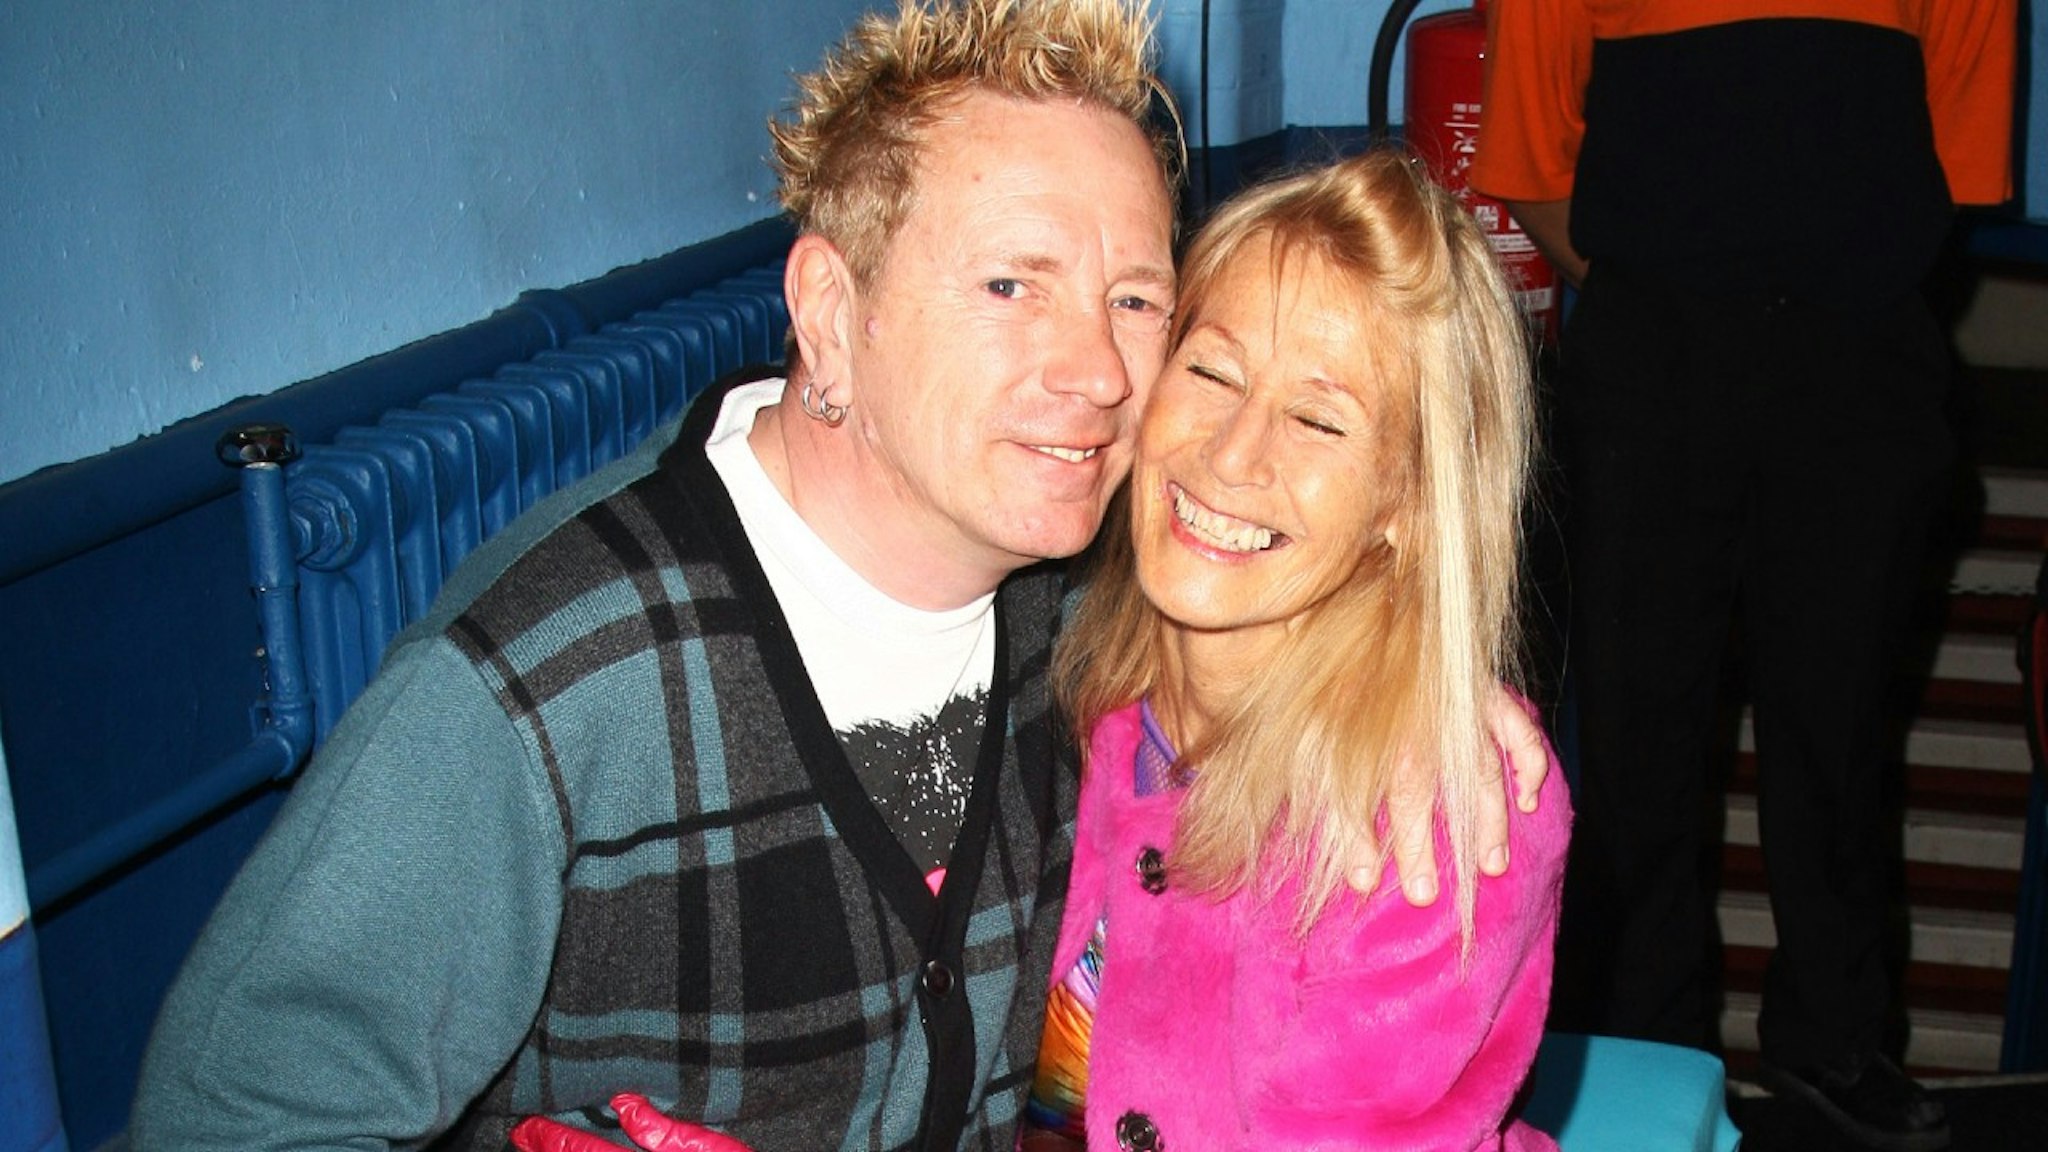 ohn Lydon formally of The Sex Pistols and Pil and his wife Nora Forster pose in front of the winners boards at the Shockwaves NME Awards 2011 held at Brixton Academy on February 23, 2011 in London, England.